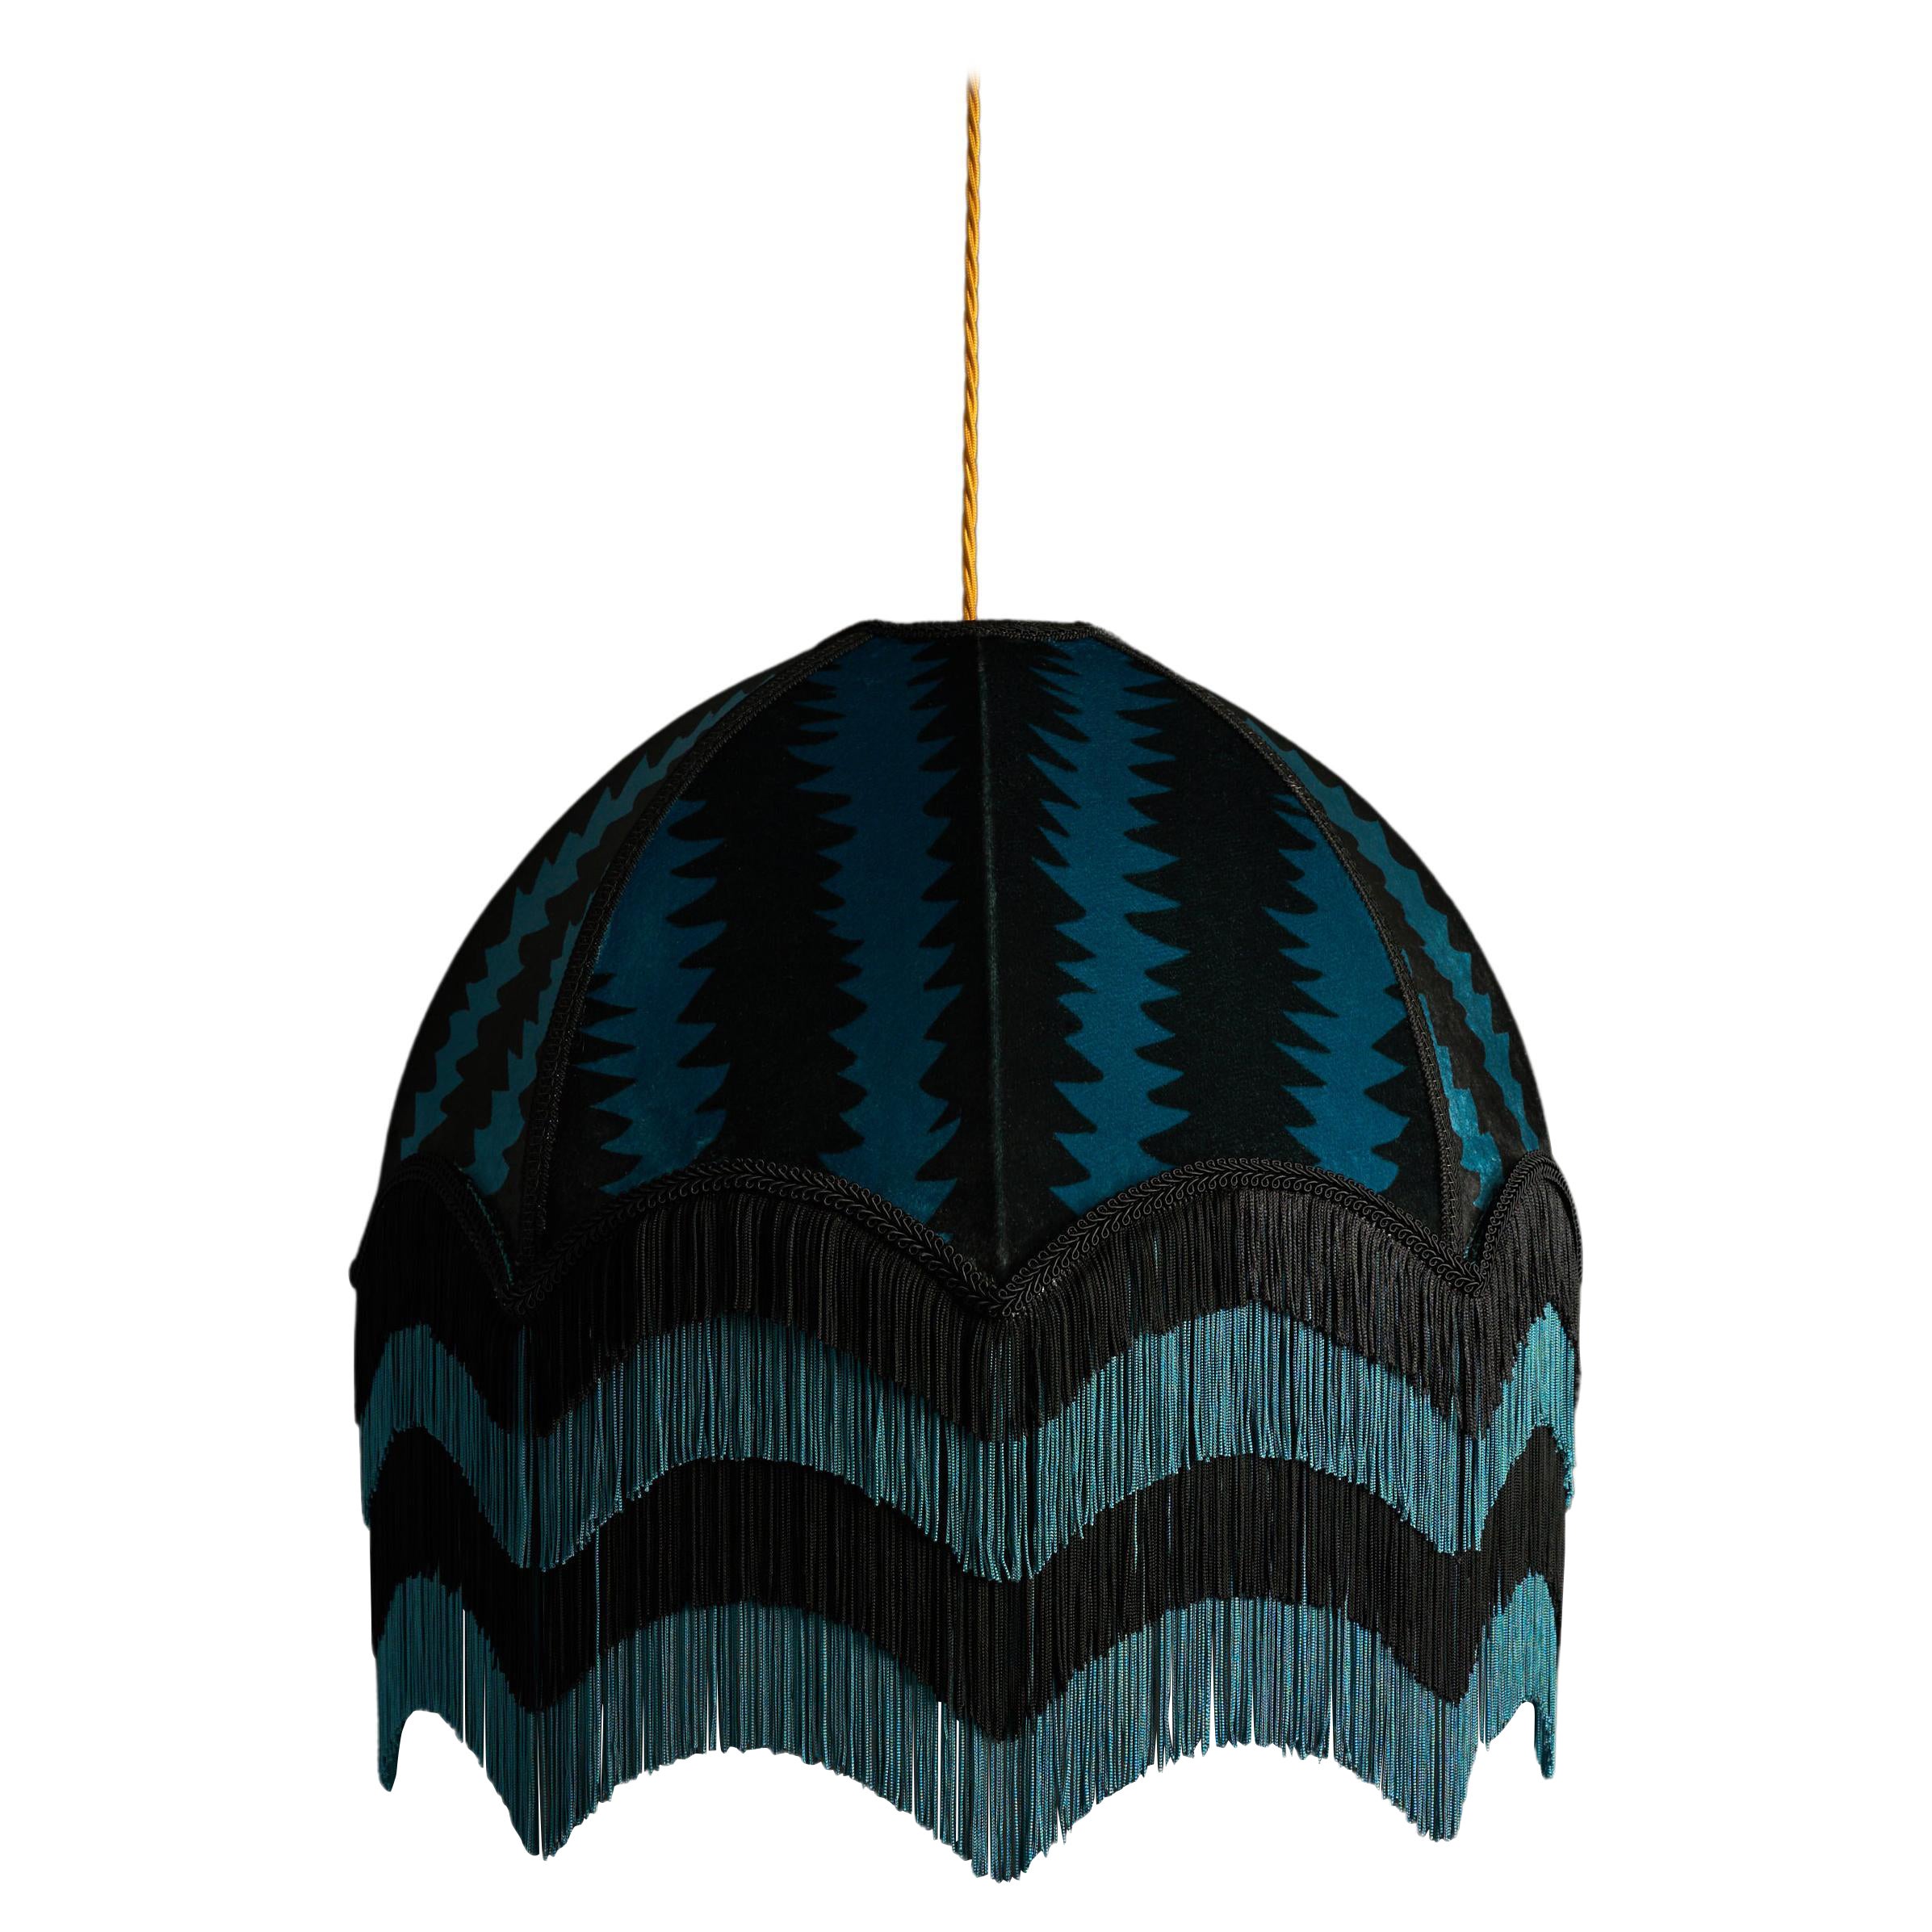 Fitz Lampshade with Fringing - Medium (16") For Sale